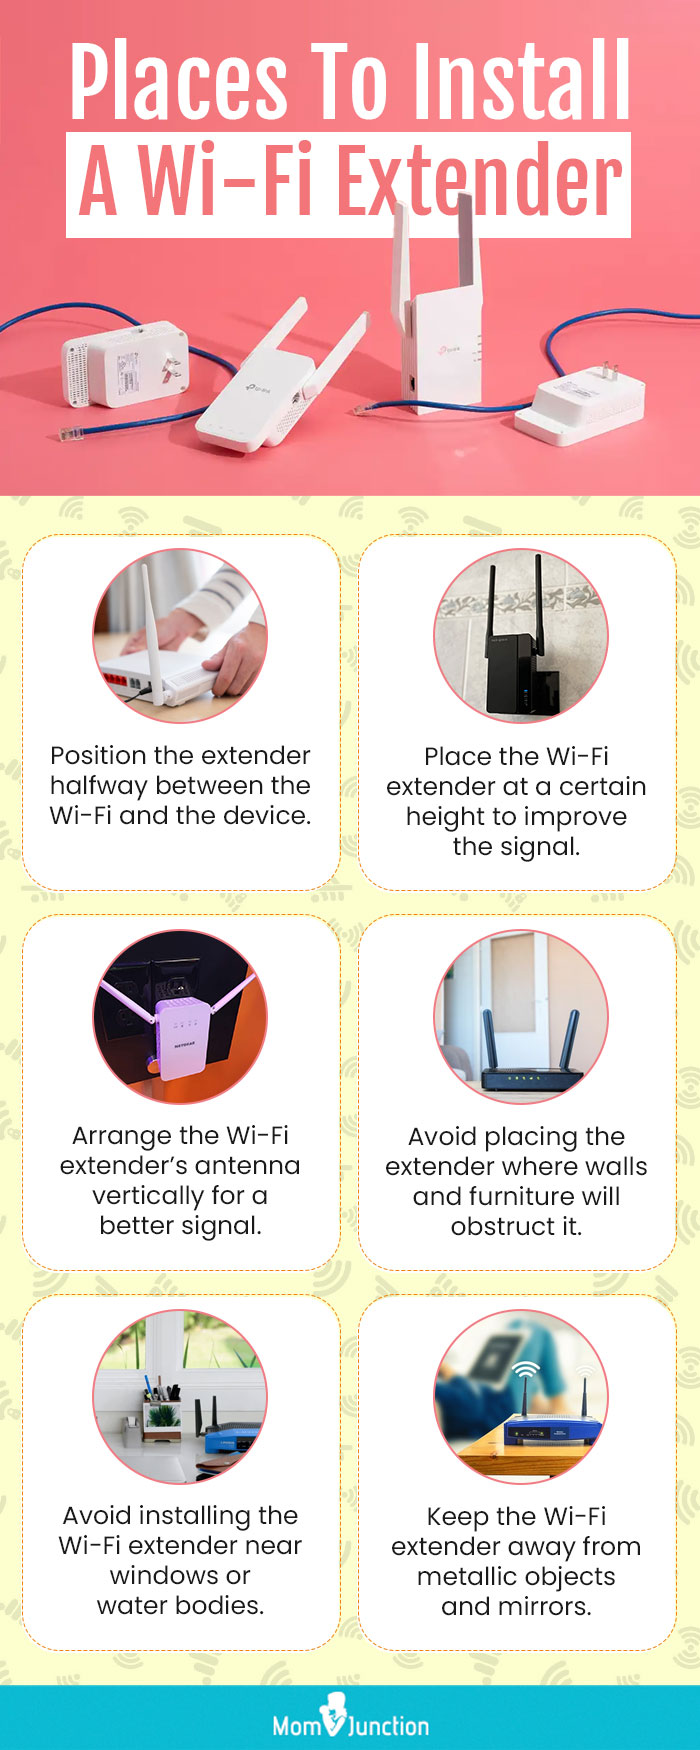 Places To Install A Wi-Fi Extender